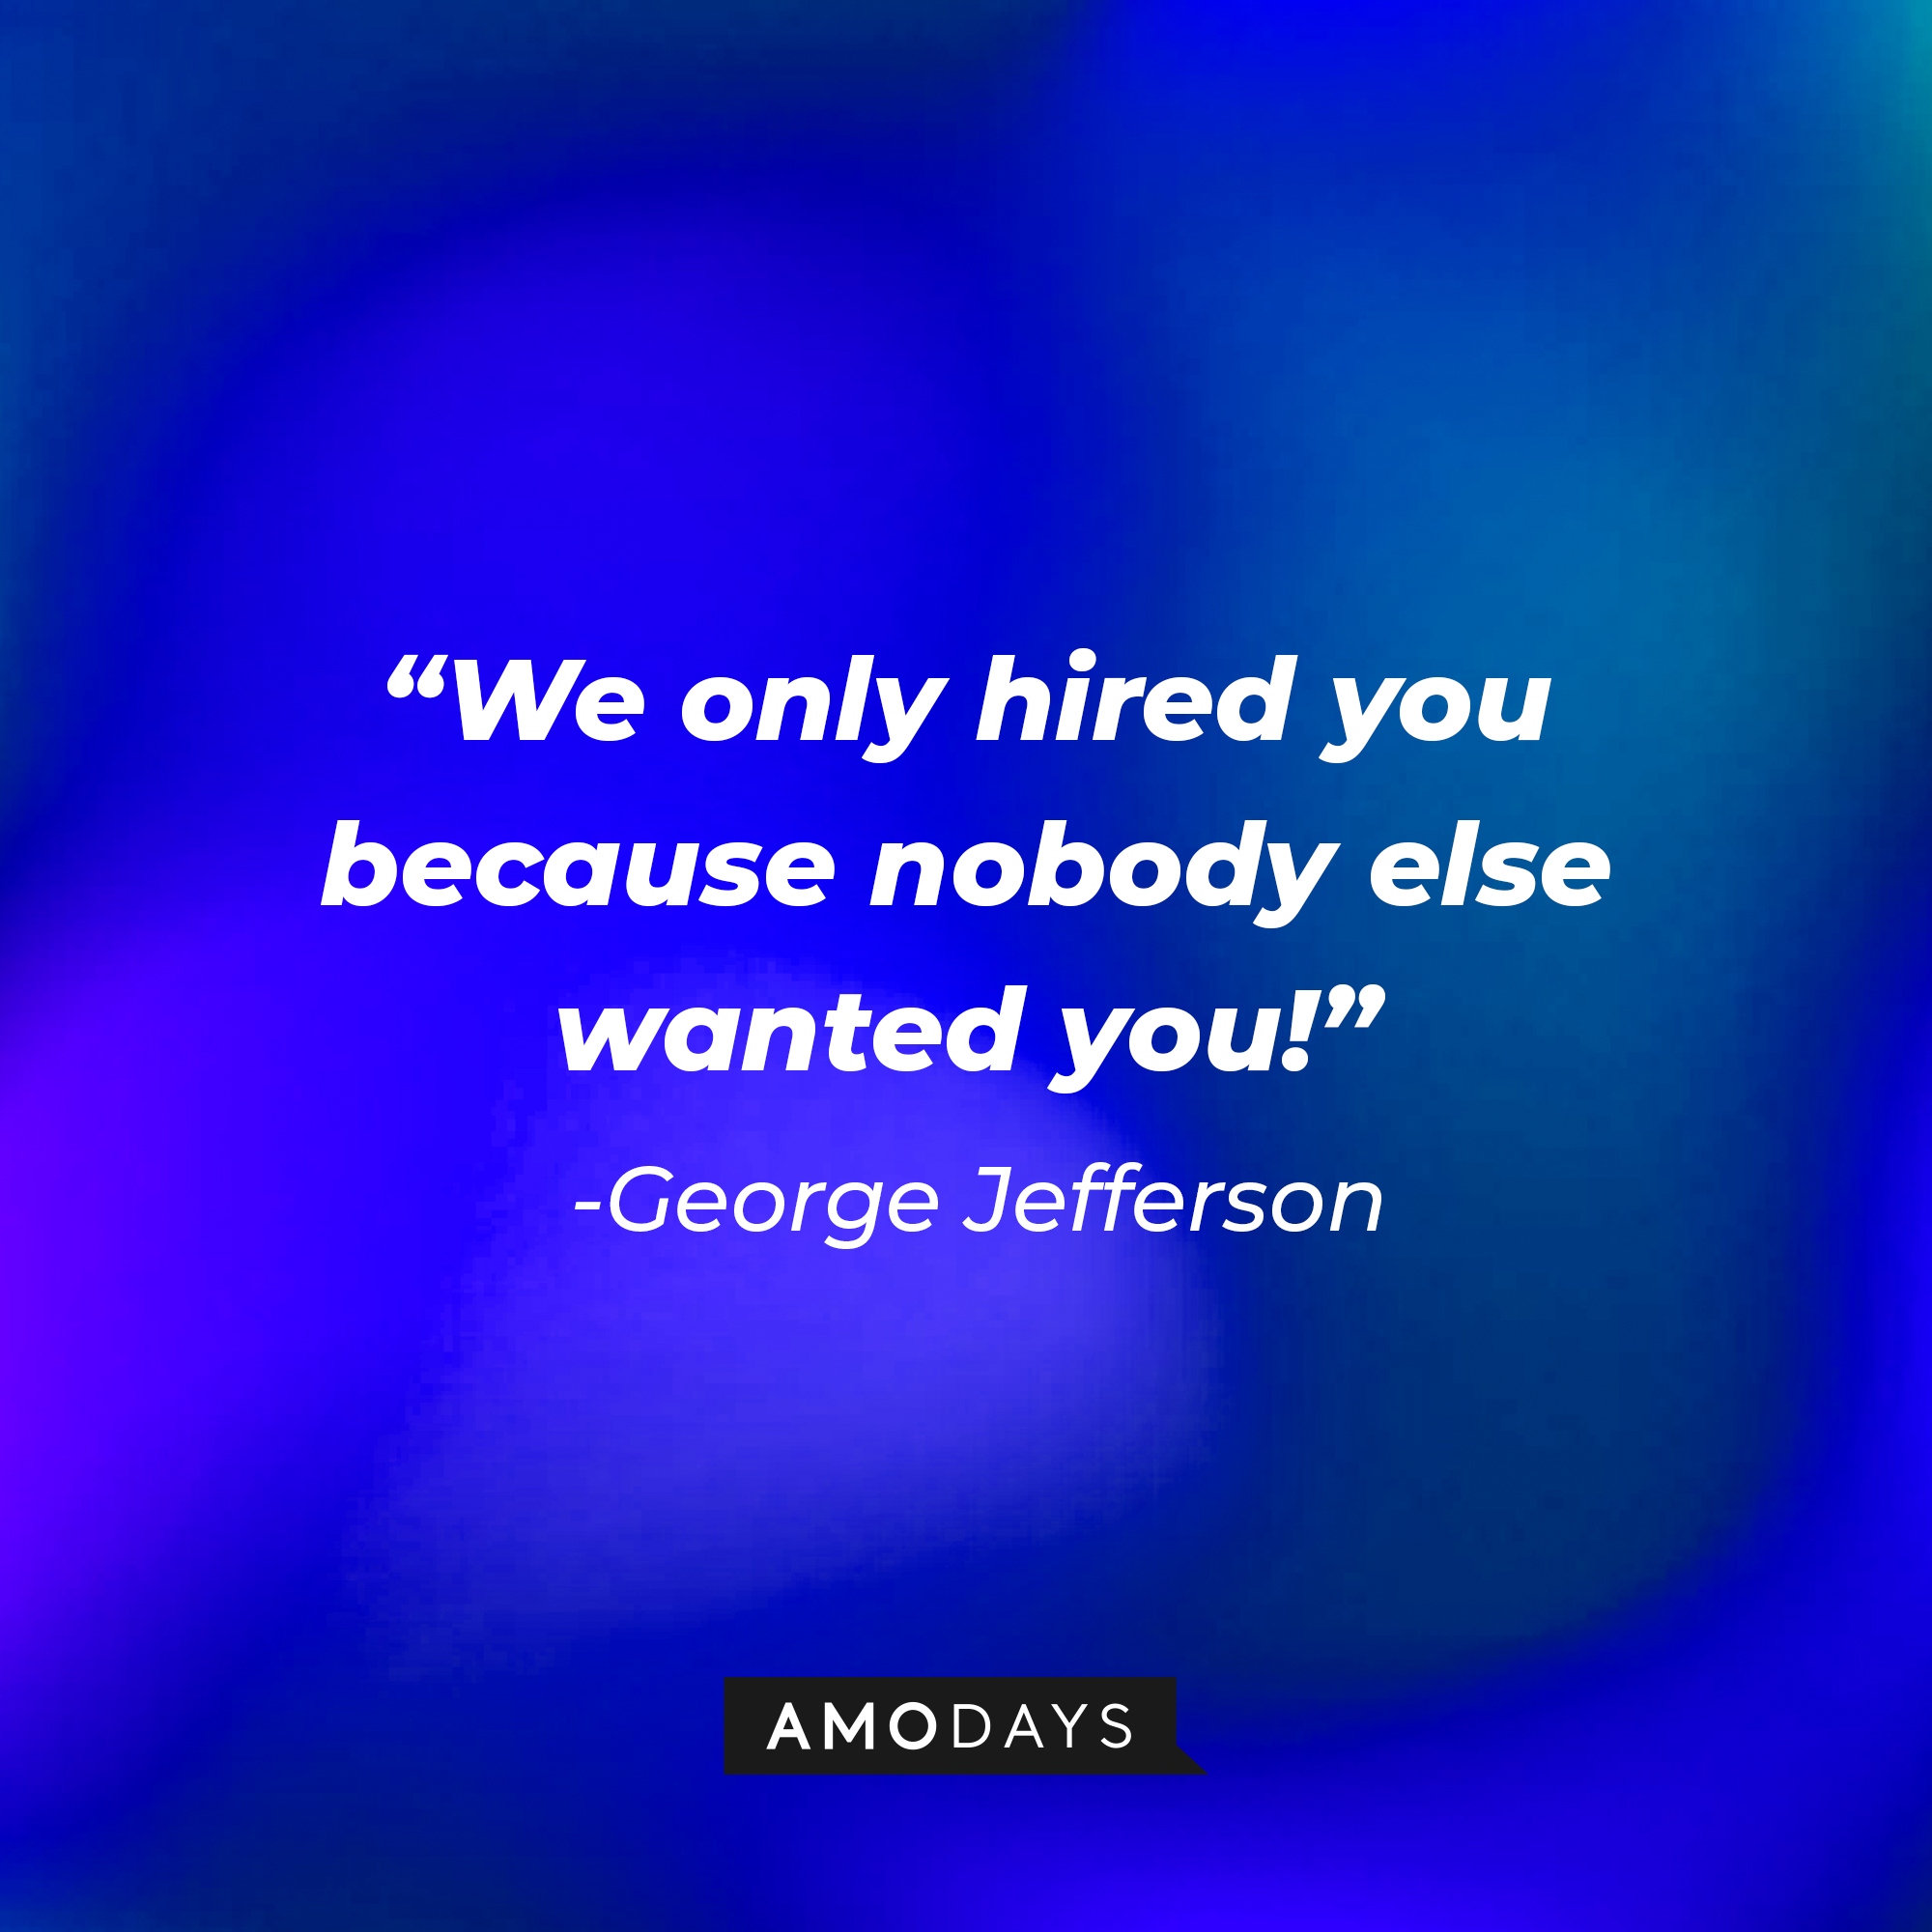 George Jefferson’s quote: “We only hired you because nobody else wanted you!” | Source: AmoDays